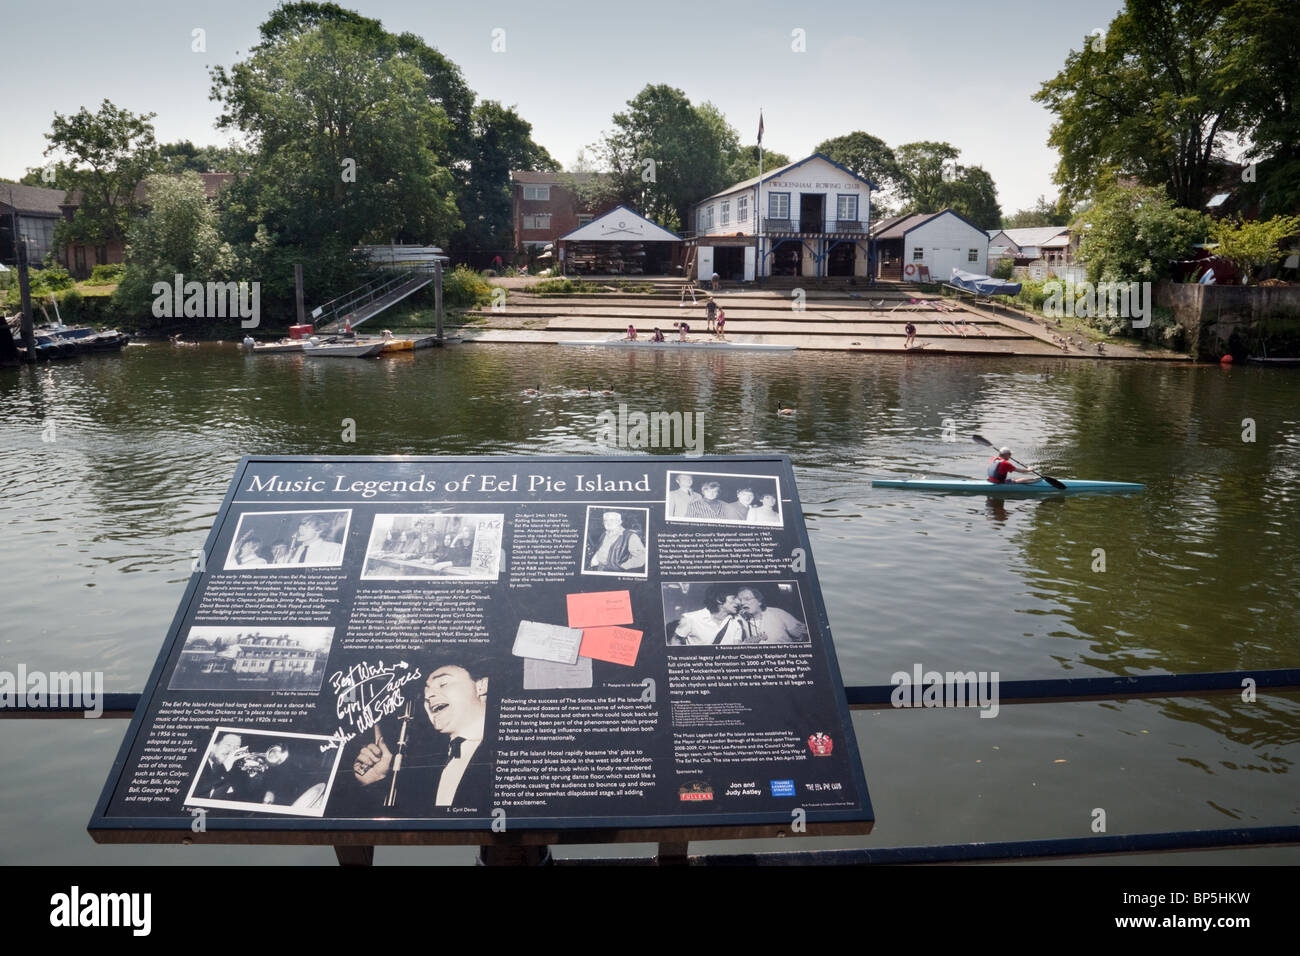 View of the River Thames at Eel Pie island, with Music Legends of Eel pie Island sign, Twickenham, London UK Stock Photo